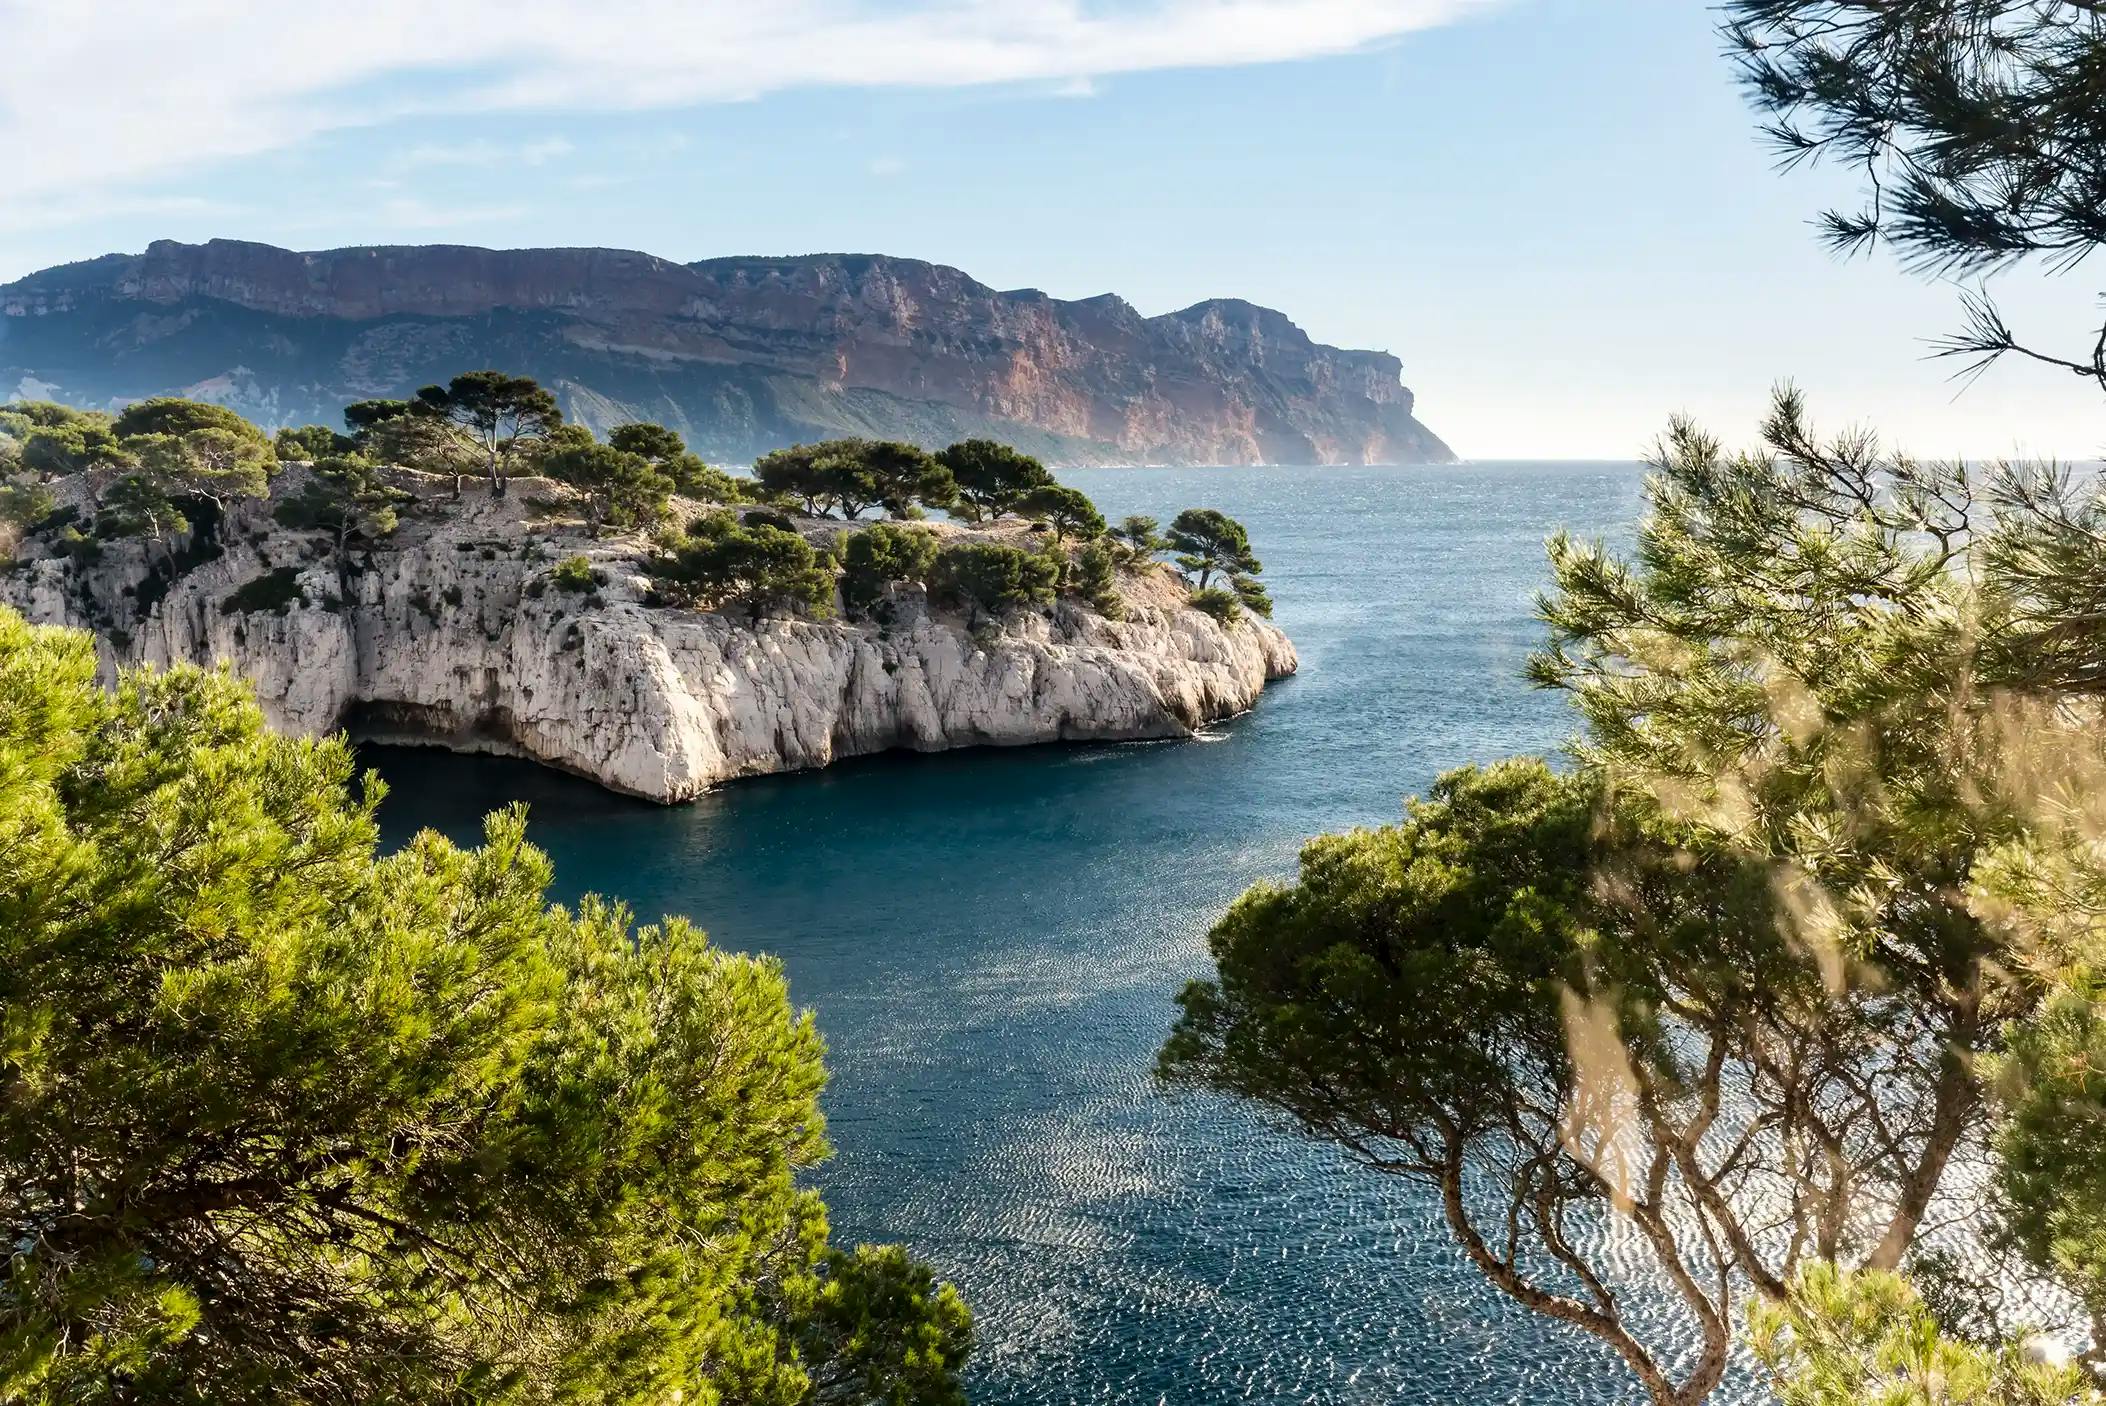 Scenic View Of Calanque And The Mediterranean Sea.